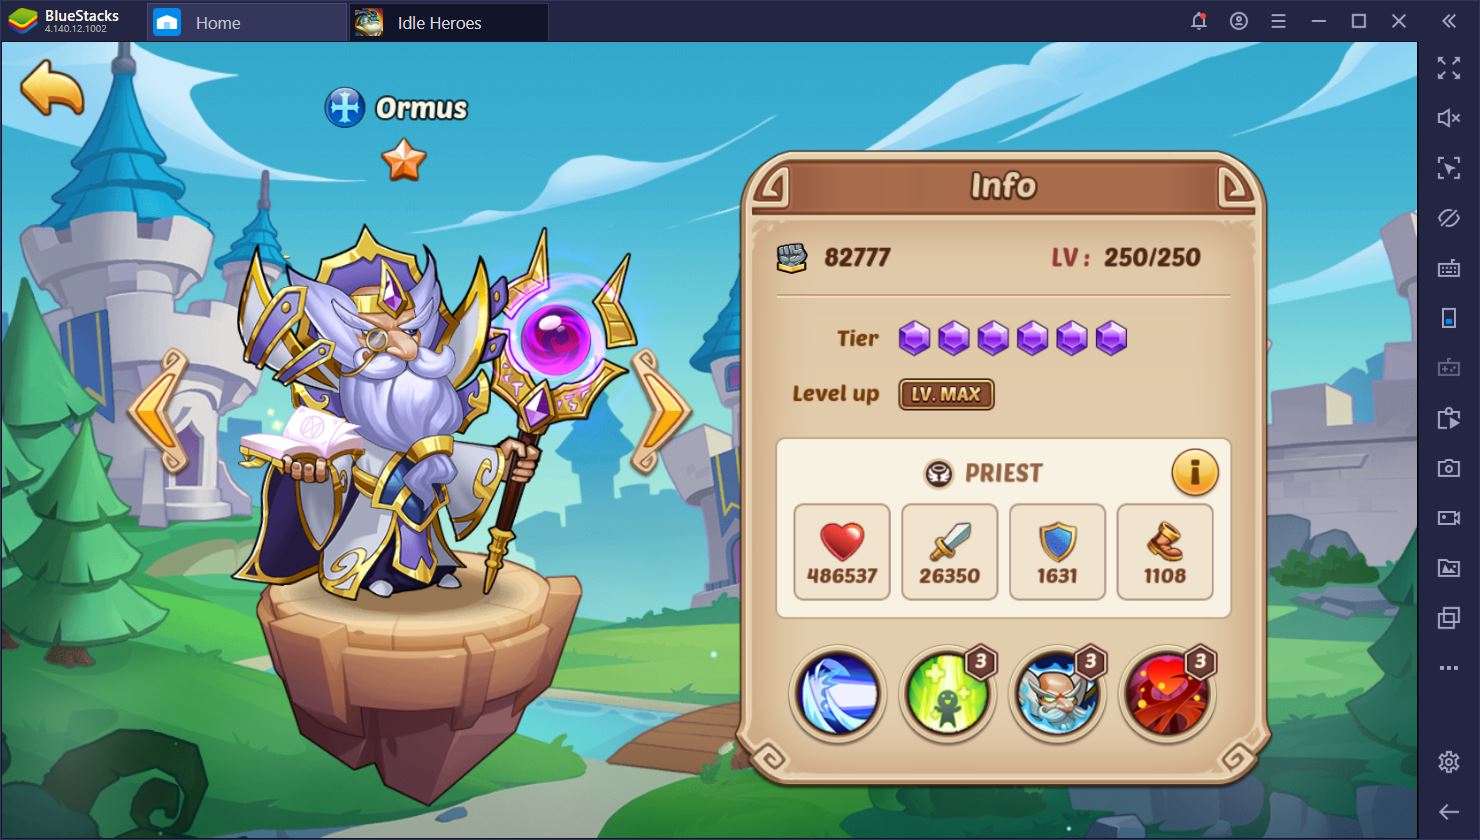 Idle Heroes on PC: The Updated Top 5 Best Heroes List for PvE and PvP